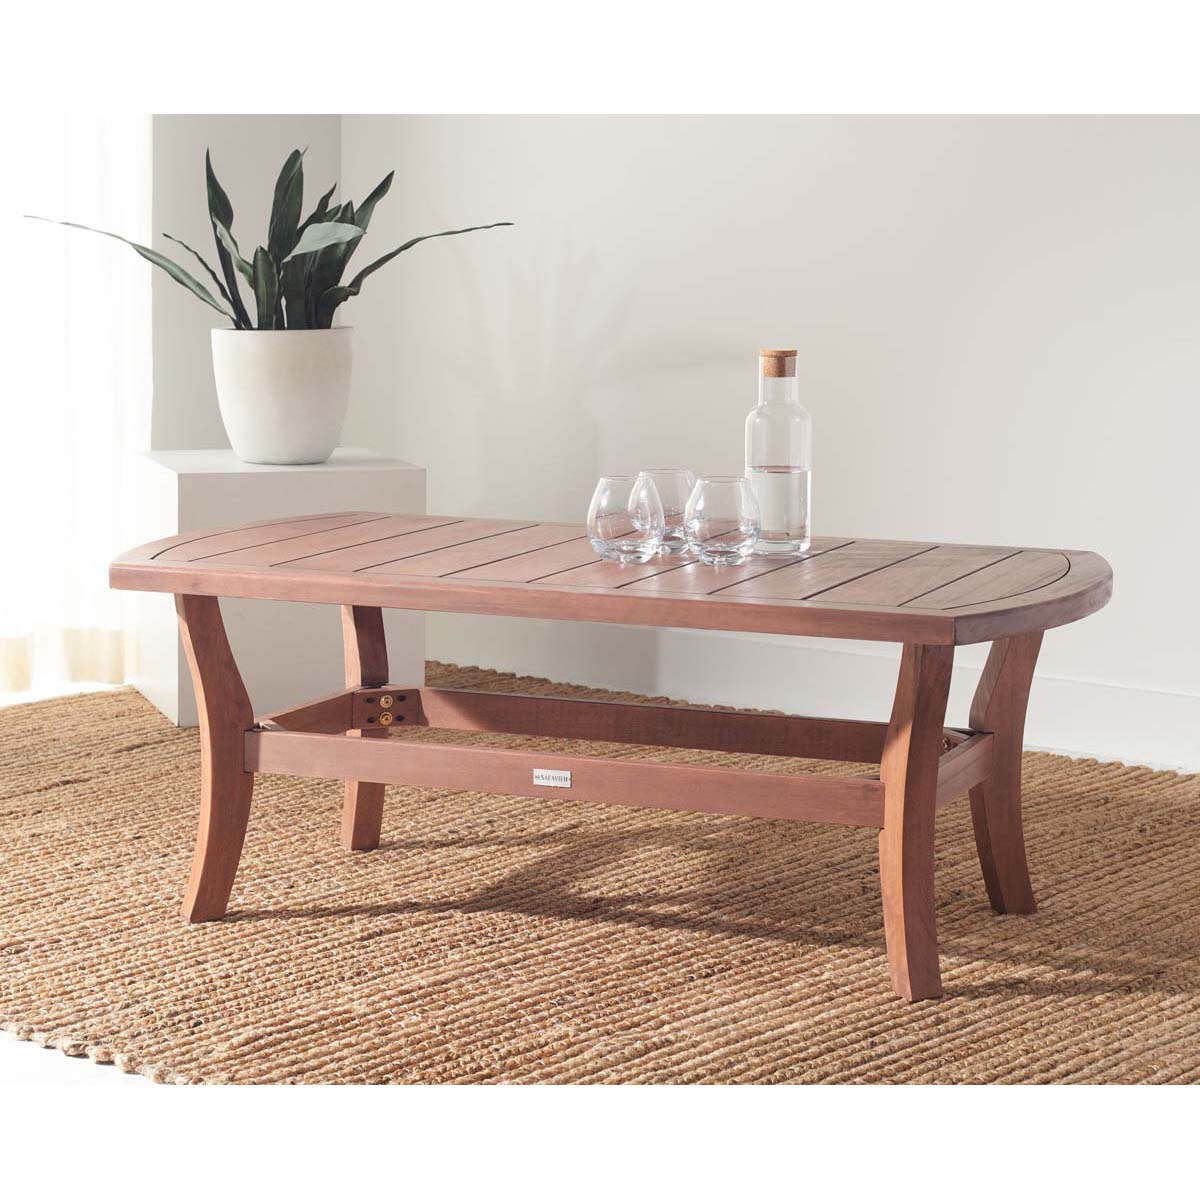 Safavieh Couture Payden Outdoor Coffee Table , CPT1024